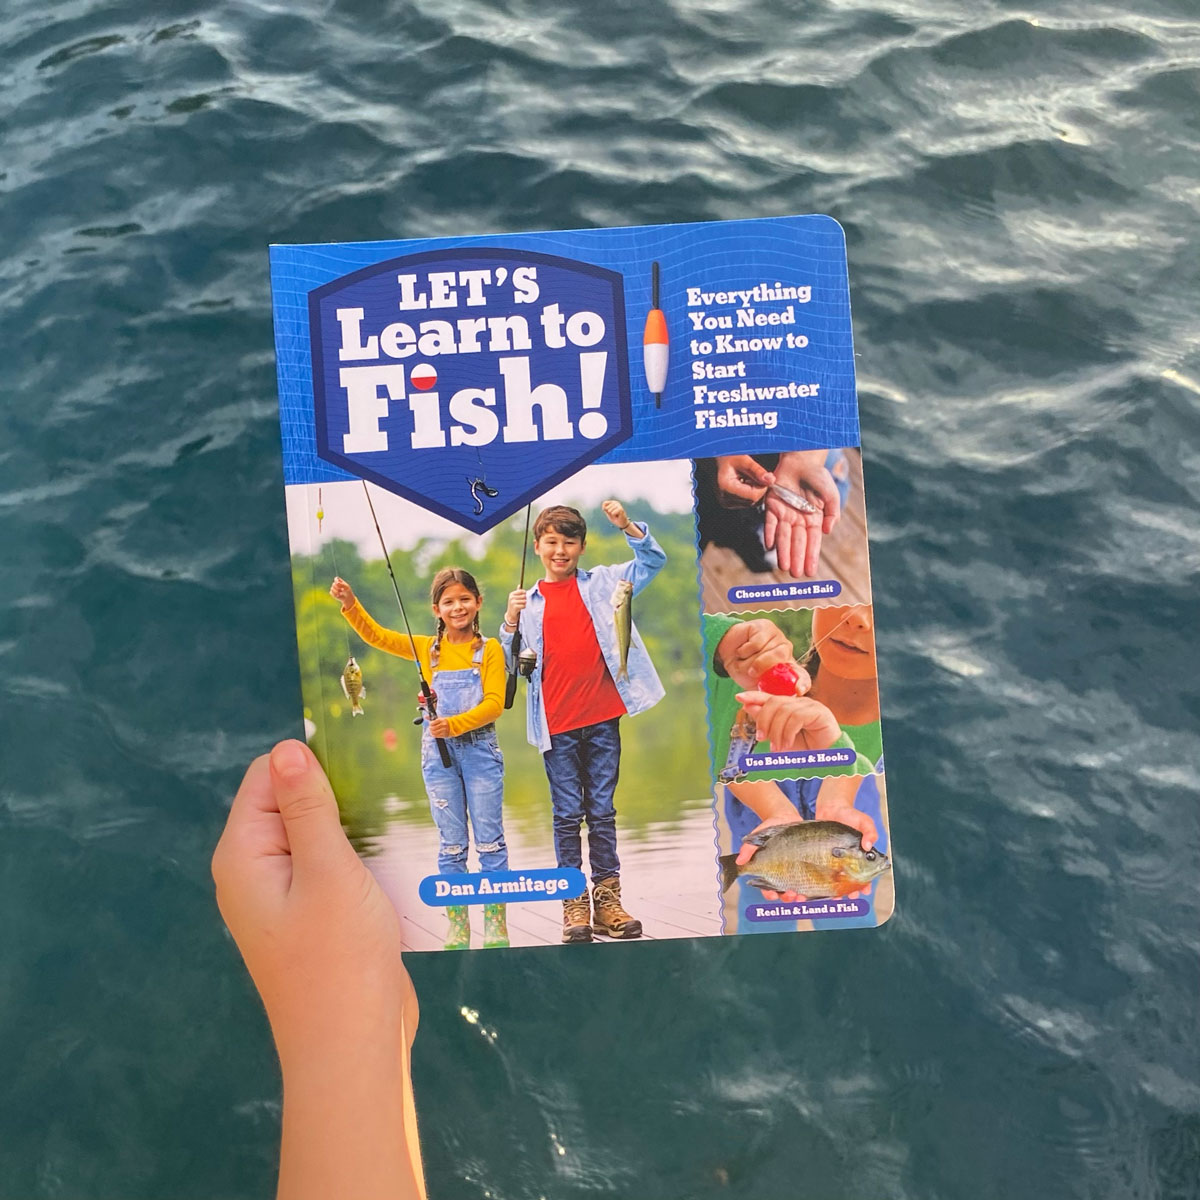 Storey Publishing on X: LET'S LEARN TO FISH! is coming soon! In